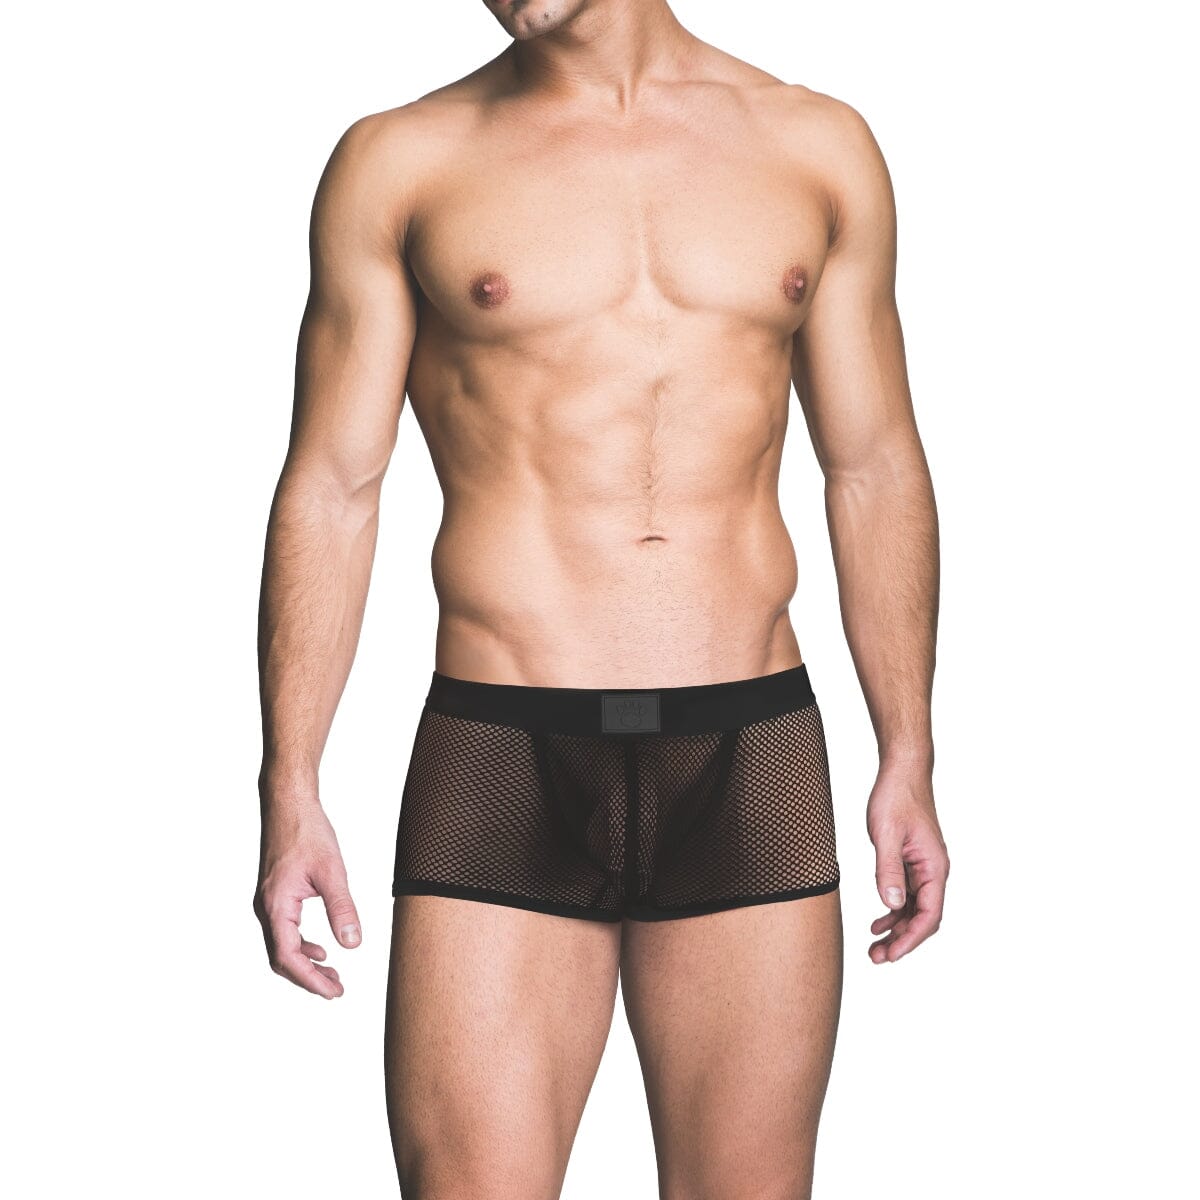 Prowler RED Fishnet Ass-less Trunk Black Menswear Prowler RED (ABS PRO) 